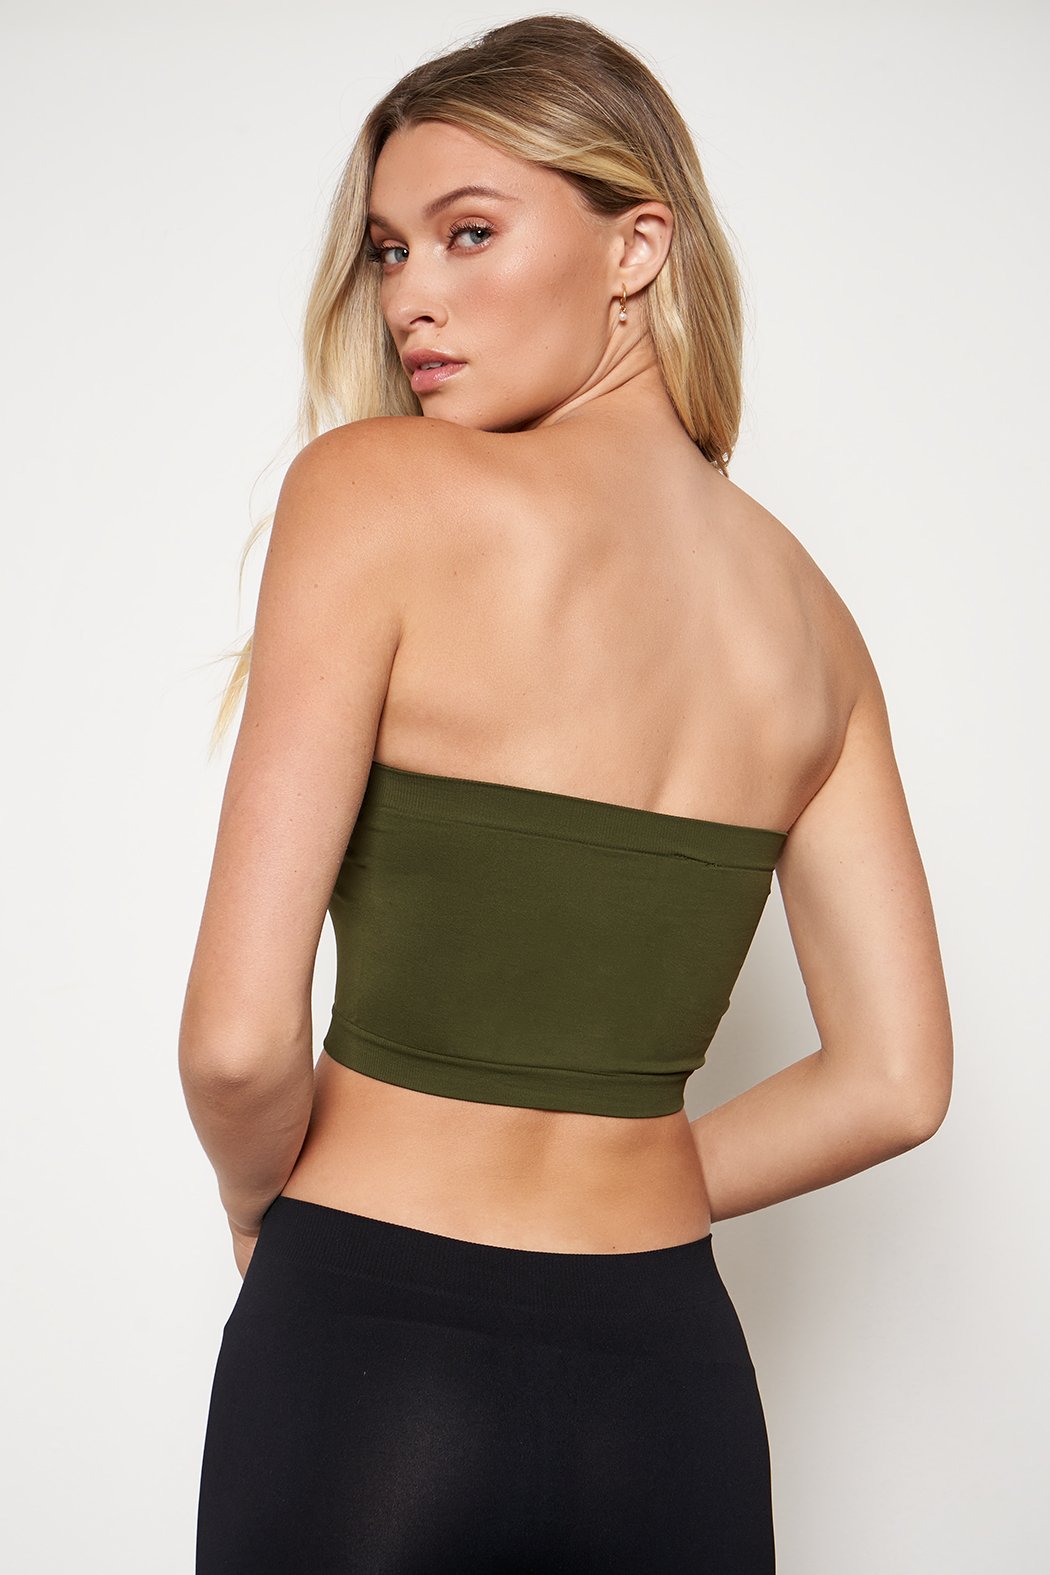 Gray Crop Tube Top, Cropped Tube Top, Crop Tops for Women, Cropped